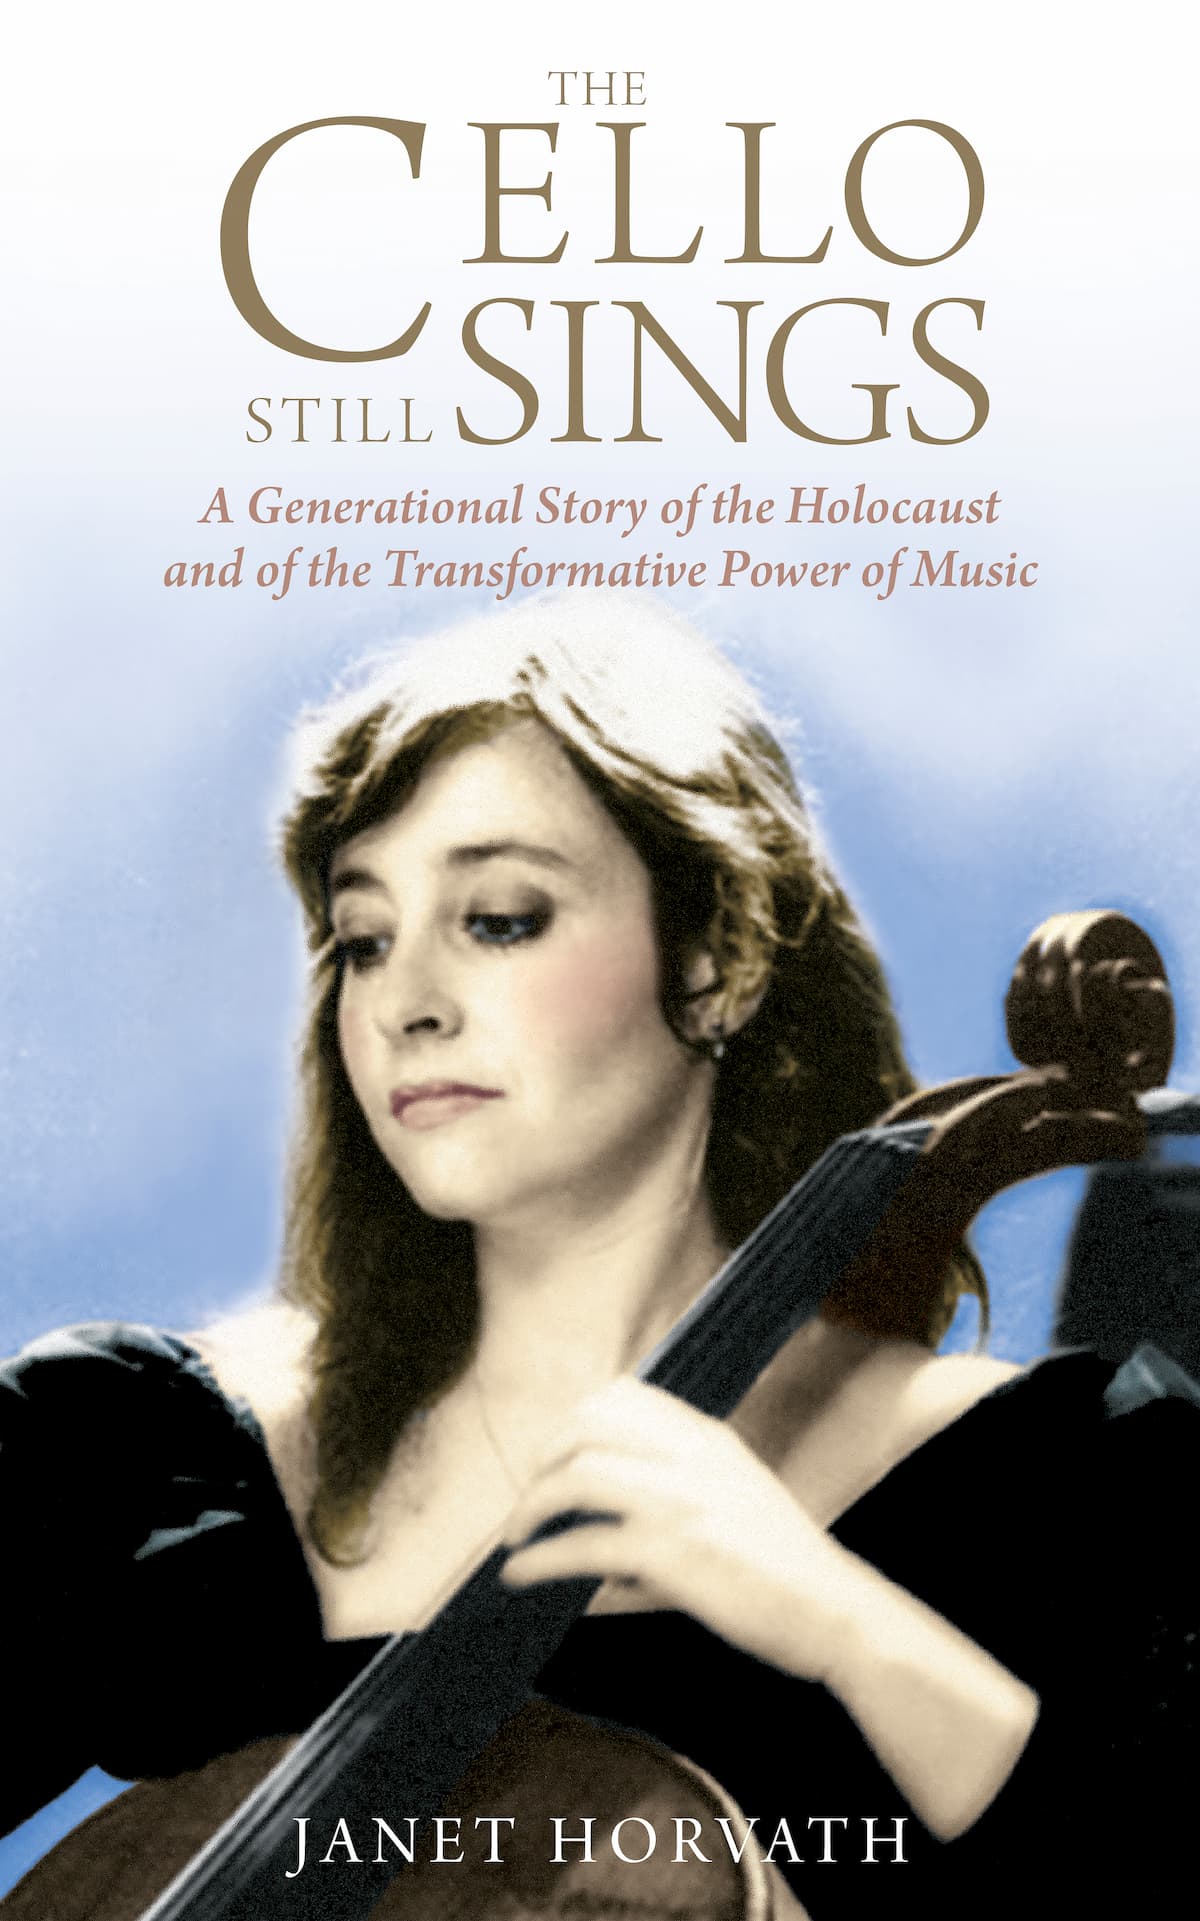 Book cover of "The Cello Still Sings - A Generational Story of the Holocaust and of the Transformative Power of Music"